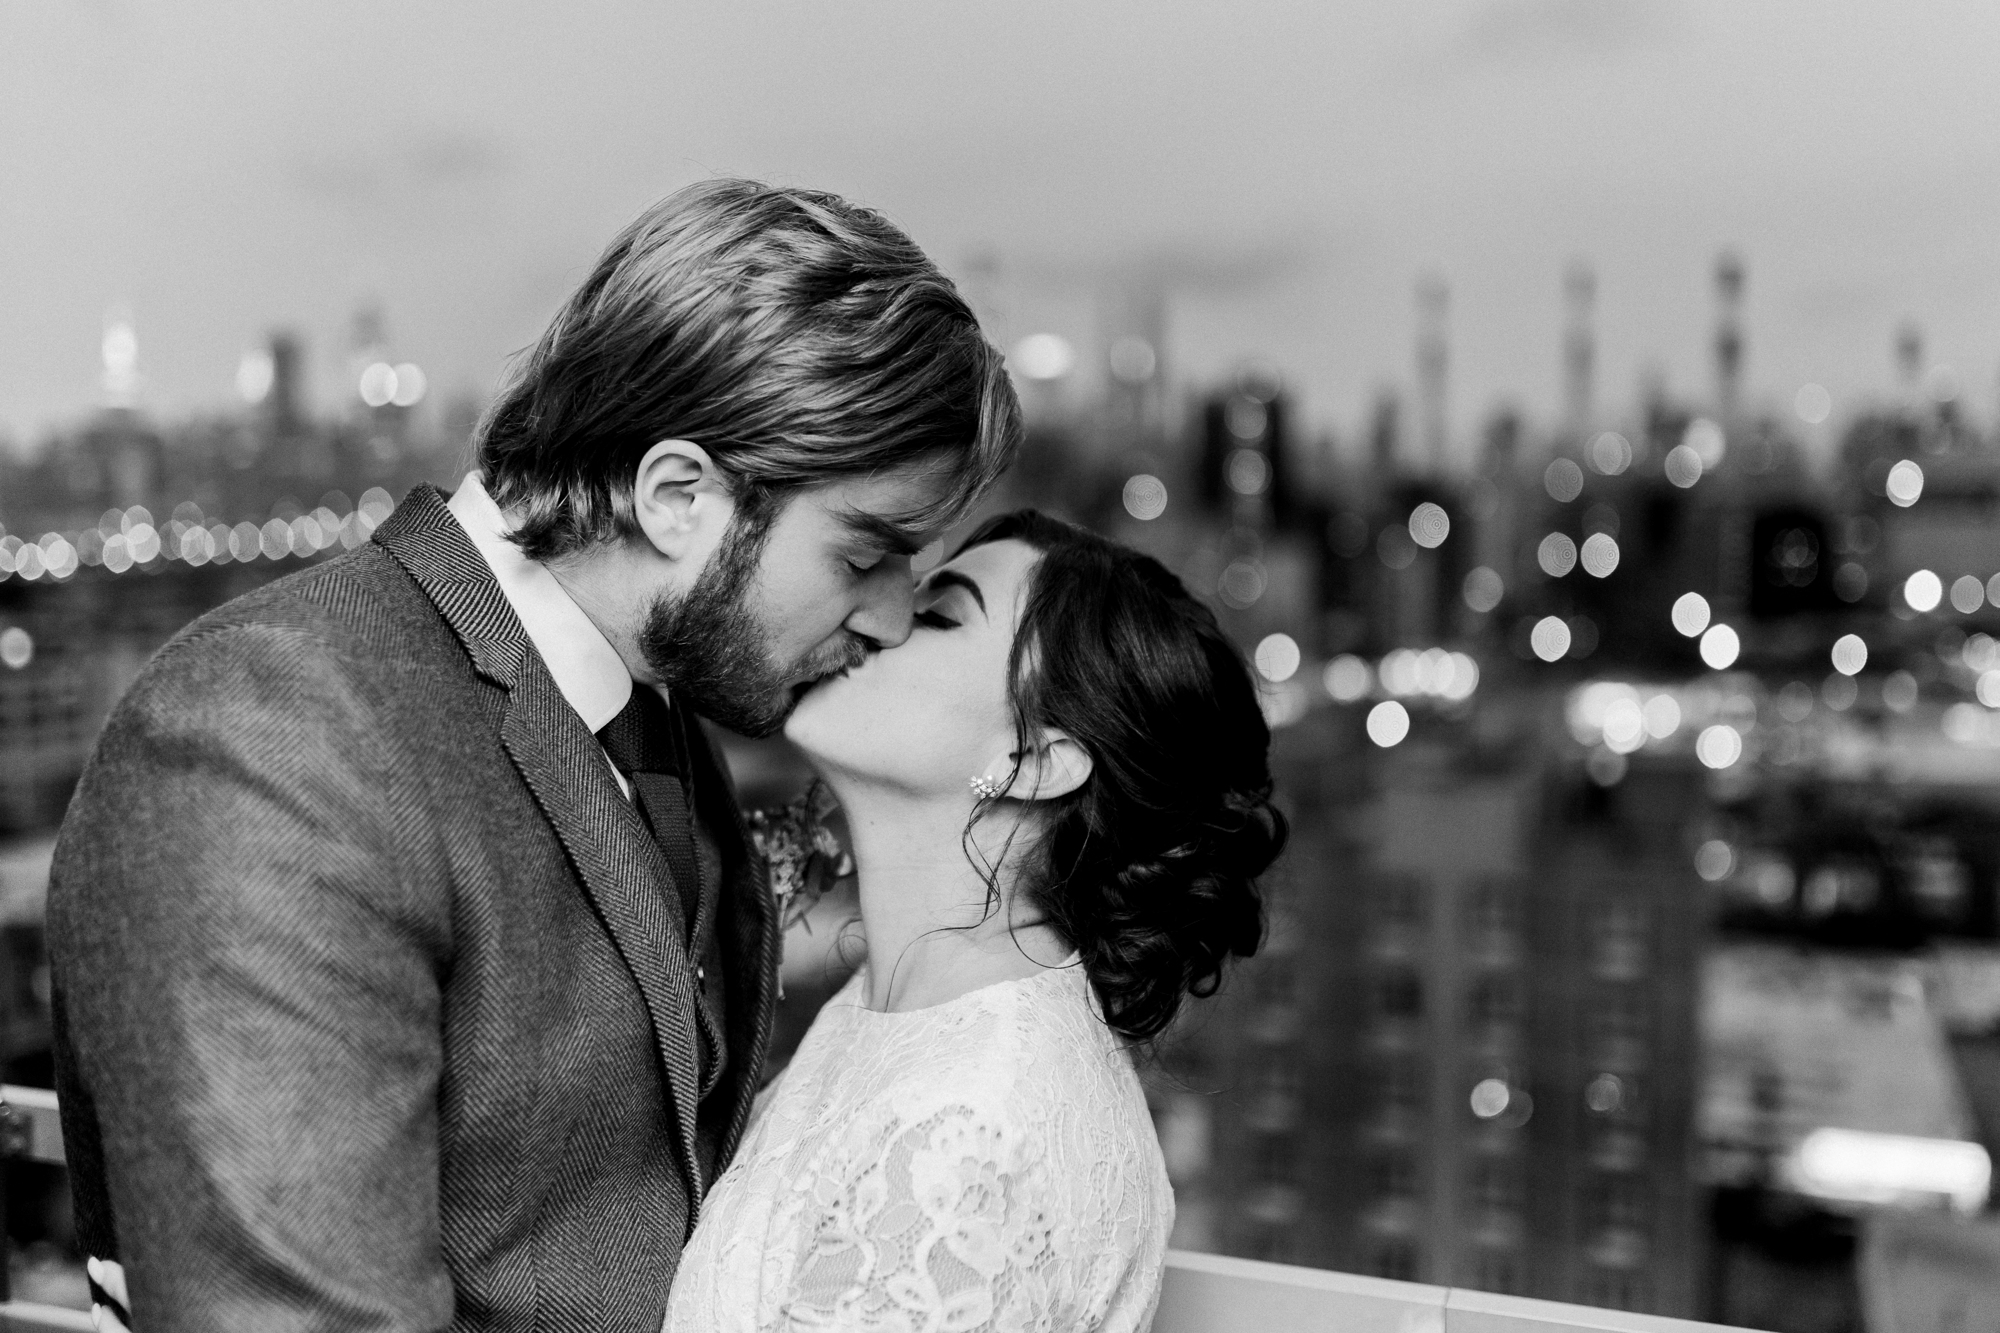 Number one wedding photographers in New York City